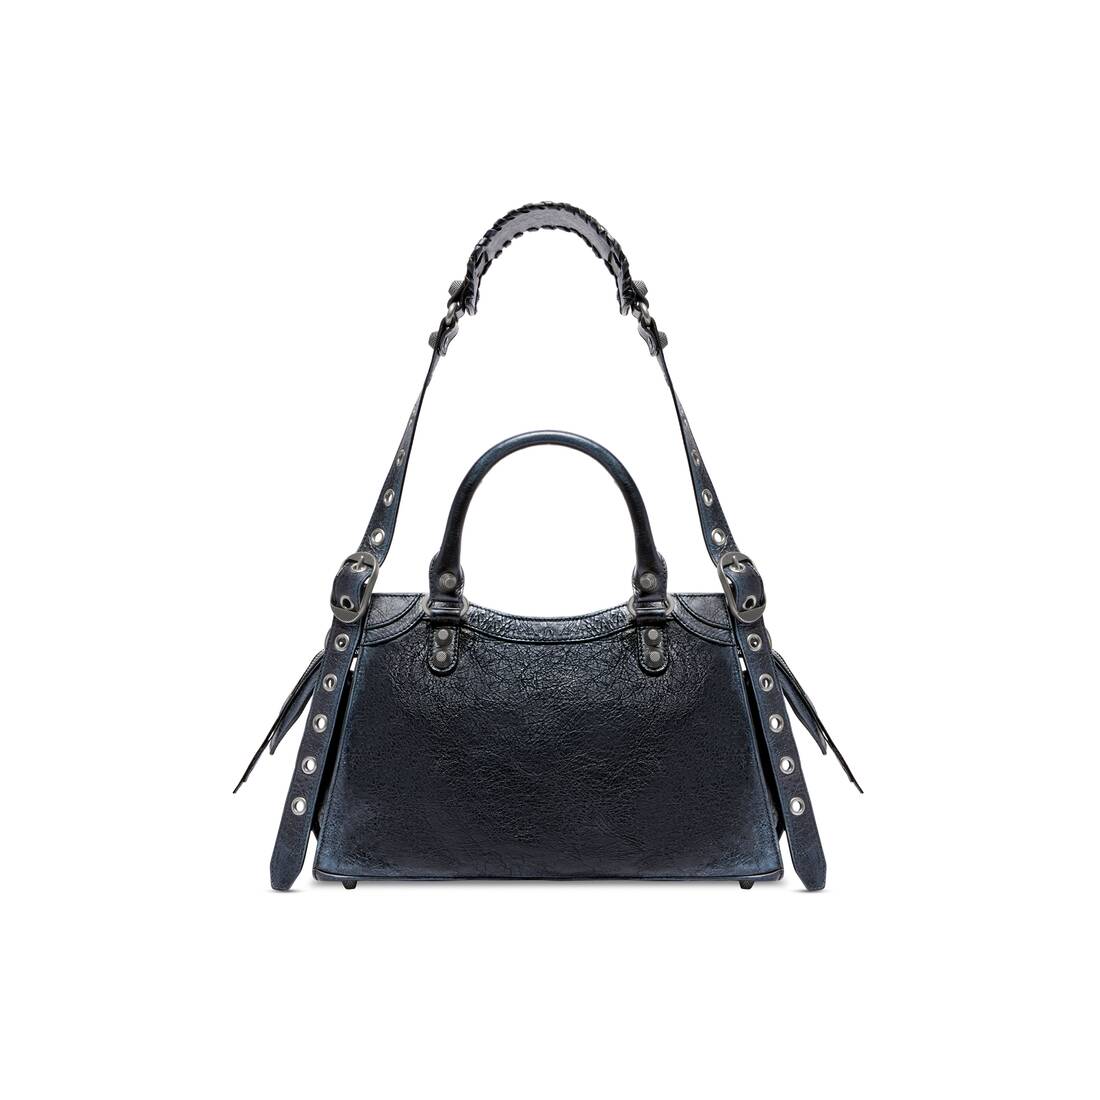 Balenciaga Small Classic City Spike Leather Satchel in Black